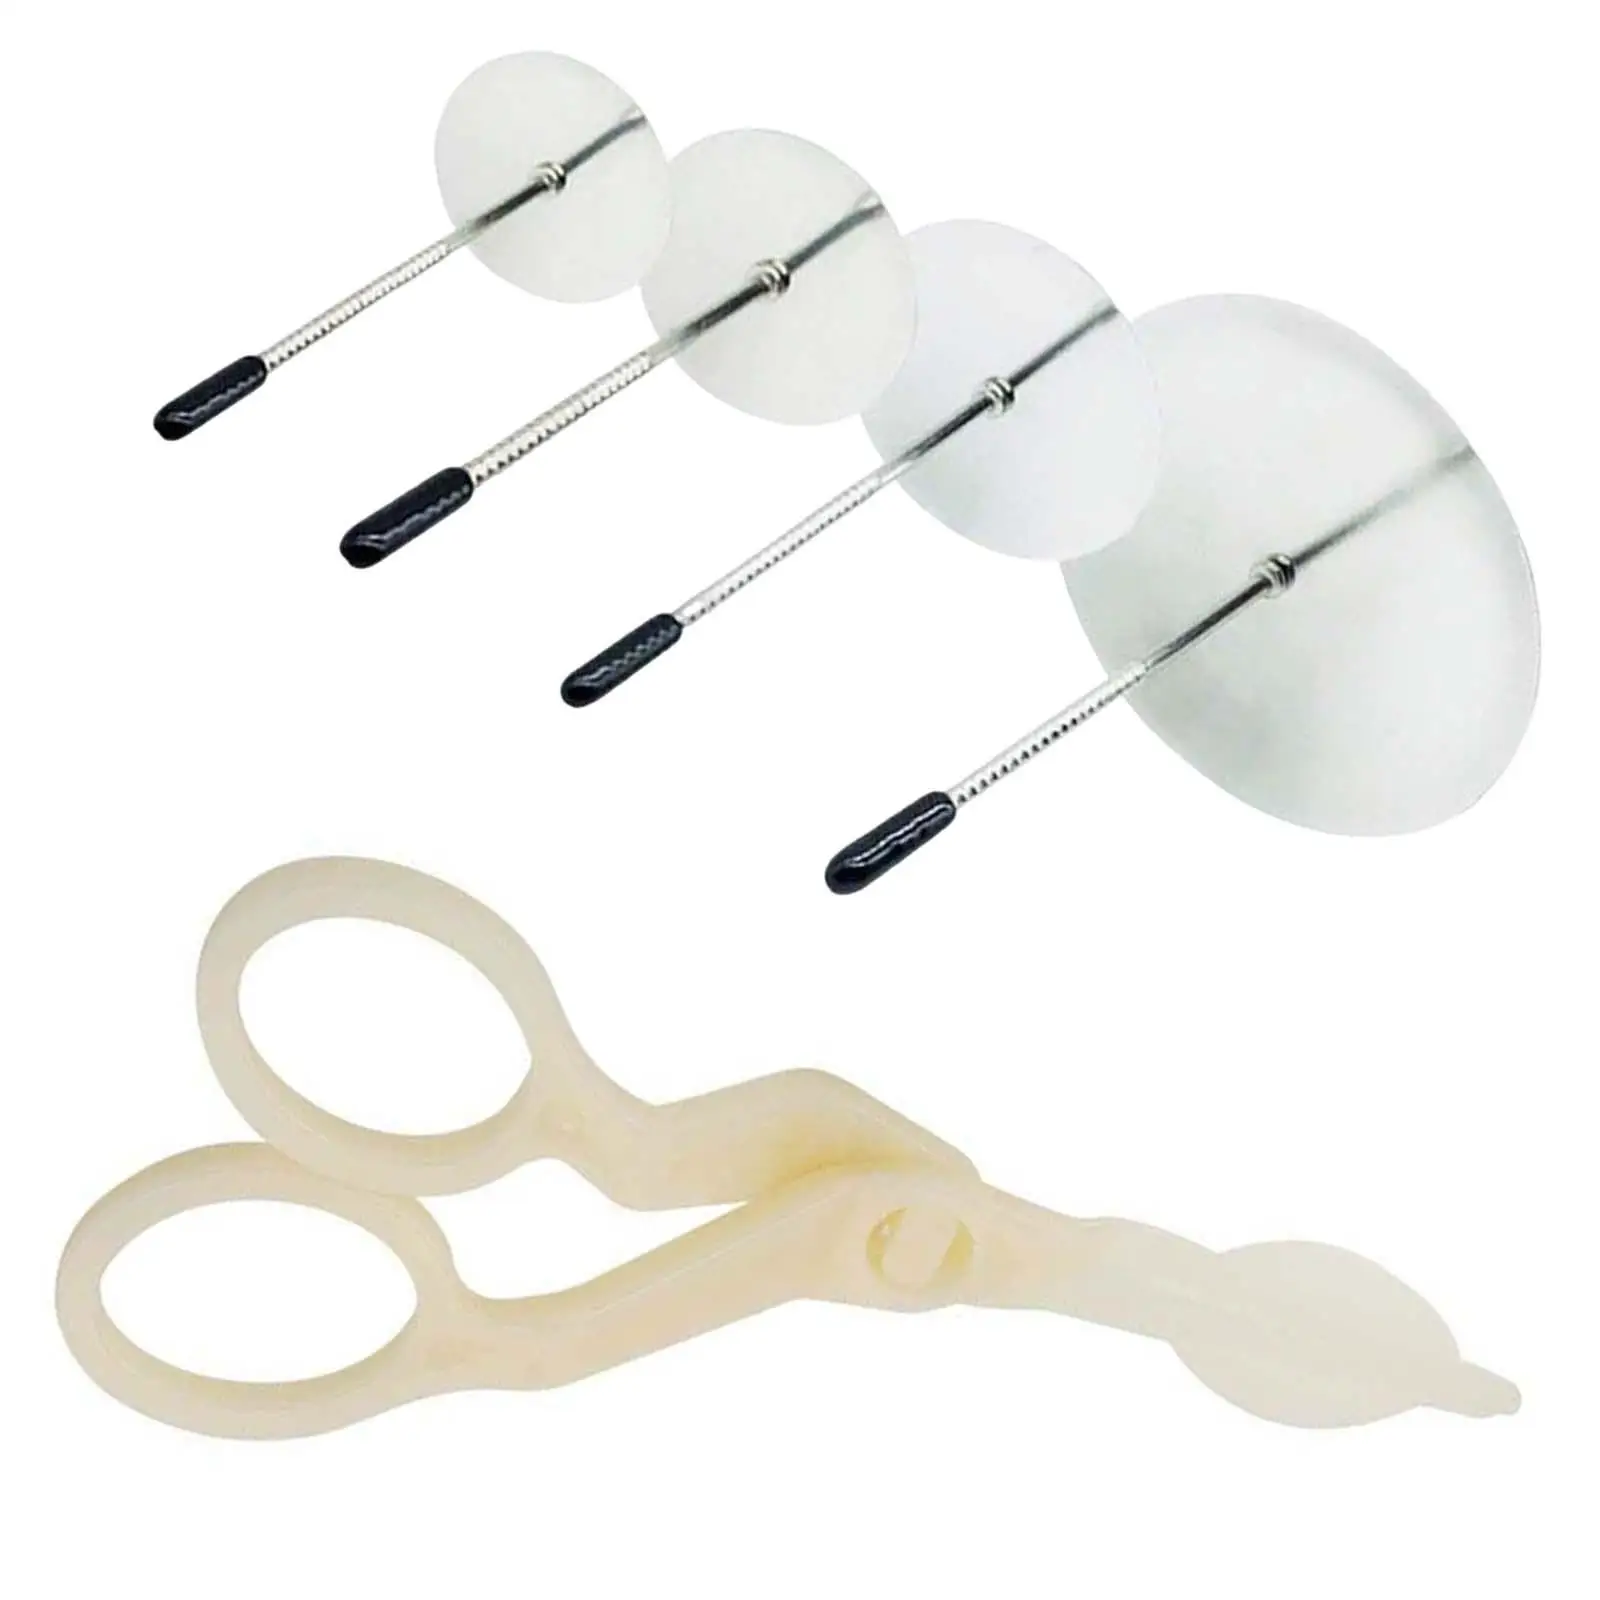 Piping Flower Scissor Ornament Fittings Display Plate Cream Transfer Cake Stand Flower Lifter for Cookies Cake Icing Frosting